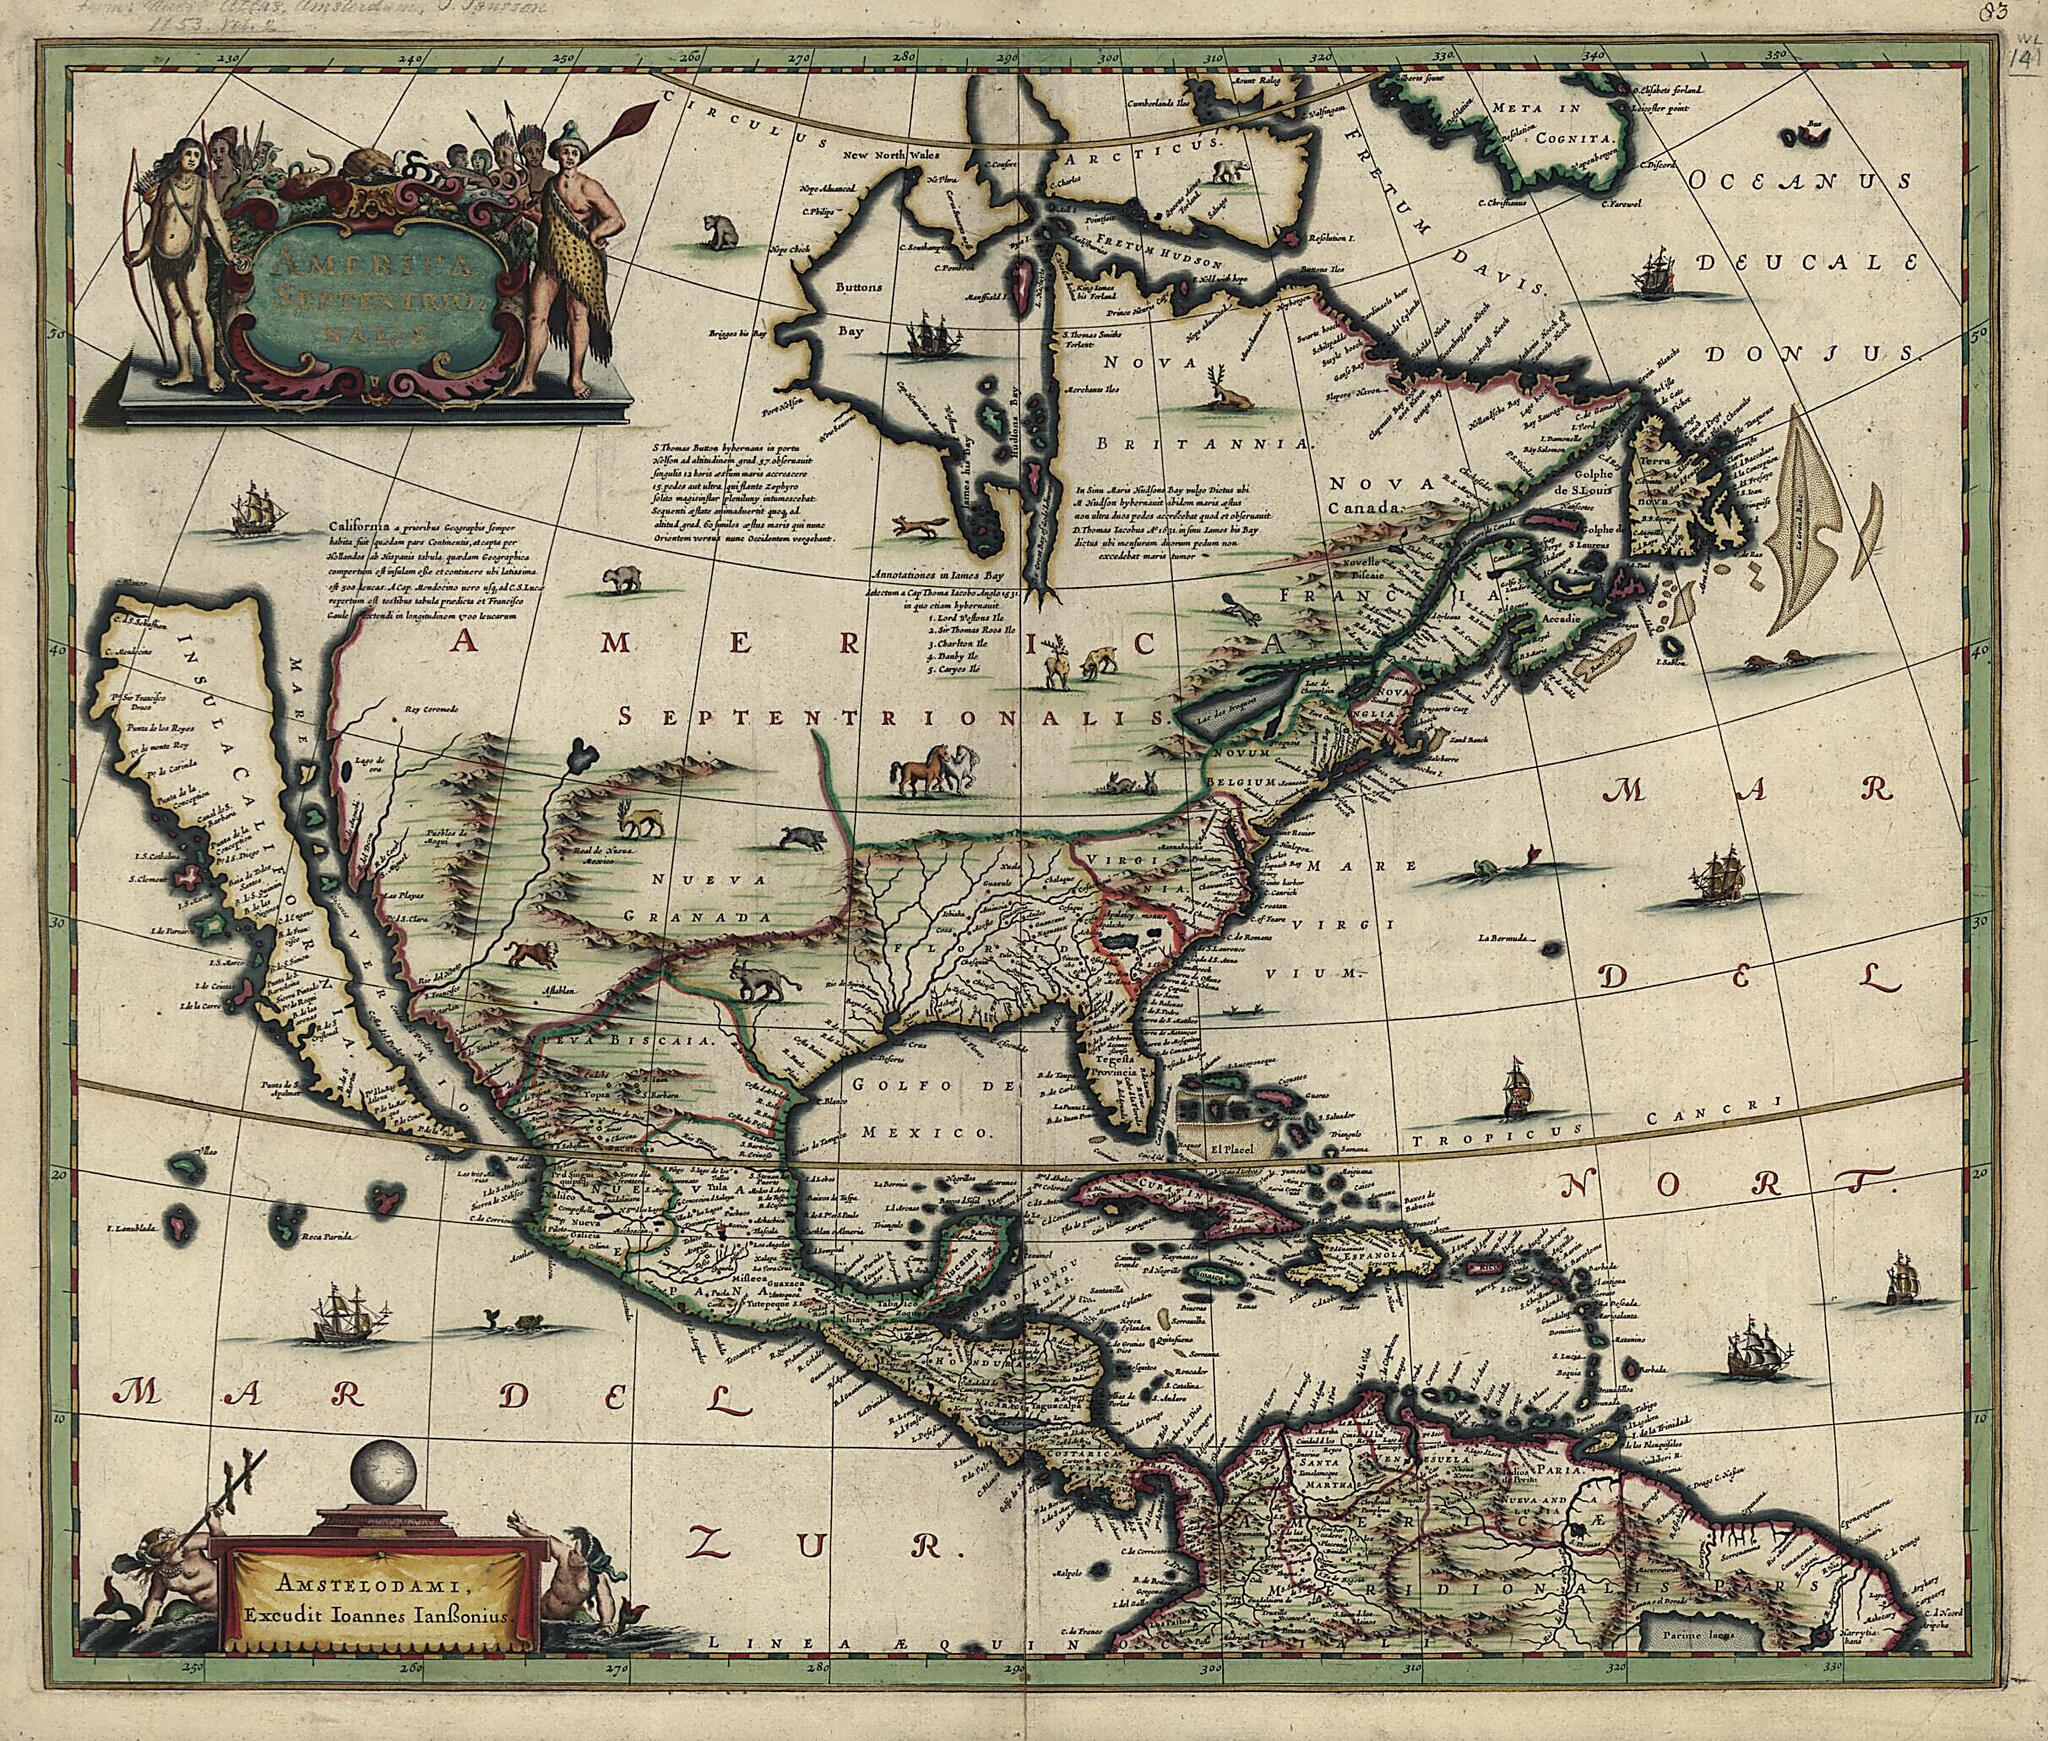 This old map of America Septentrionalis from 1652 was created by Jan Jansson in 1652